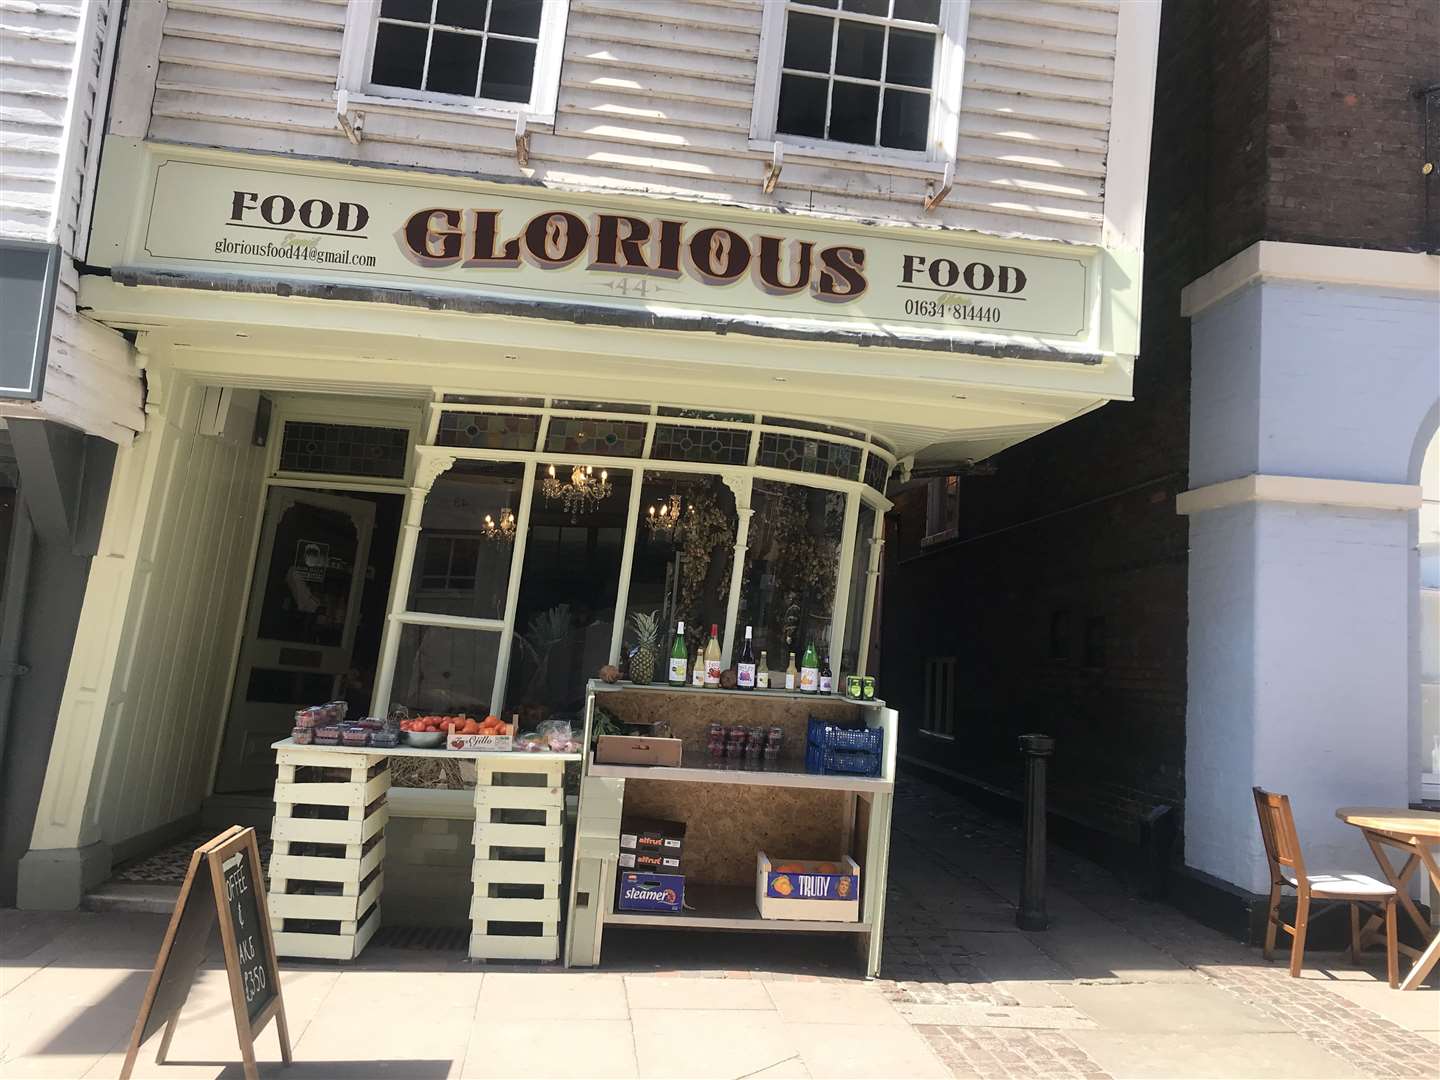 The 'wonky shop' was previously home to Food Glorious Food